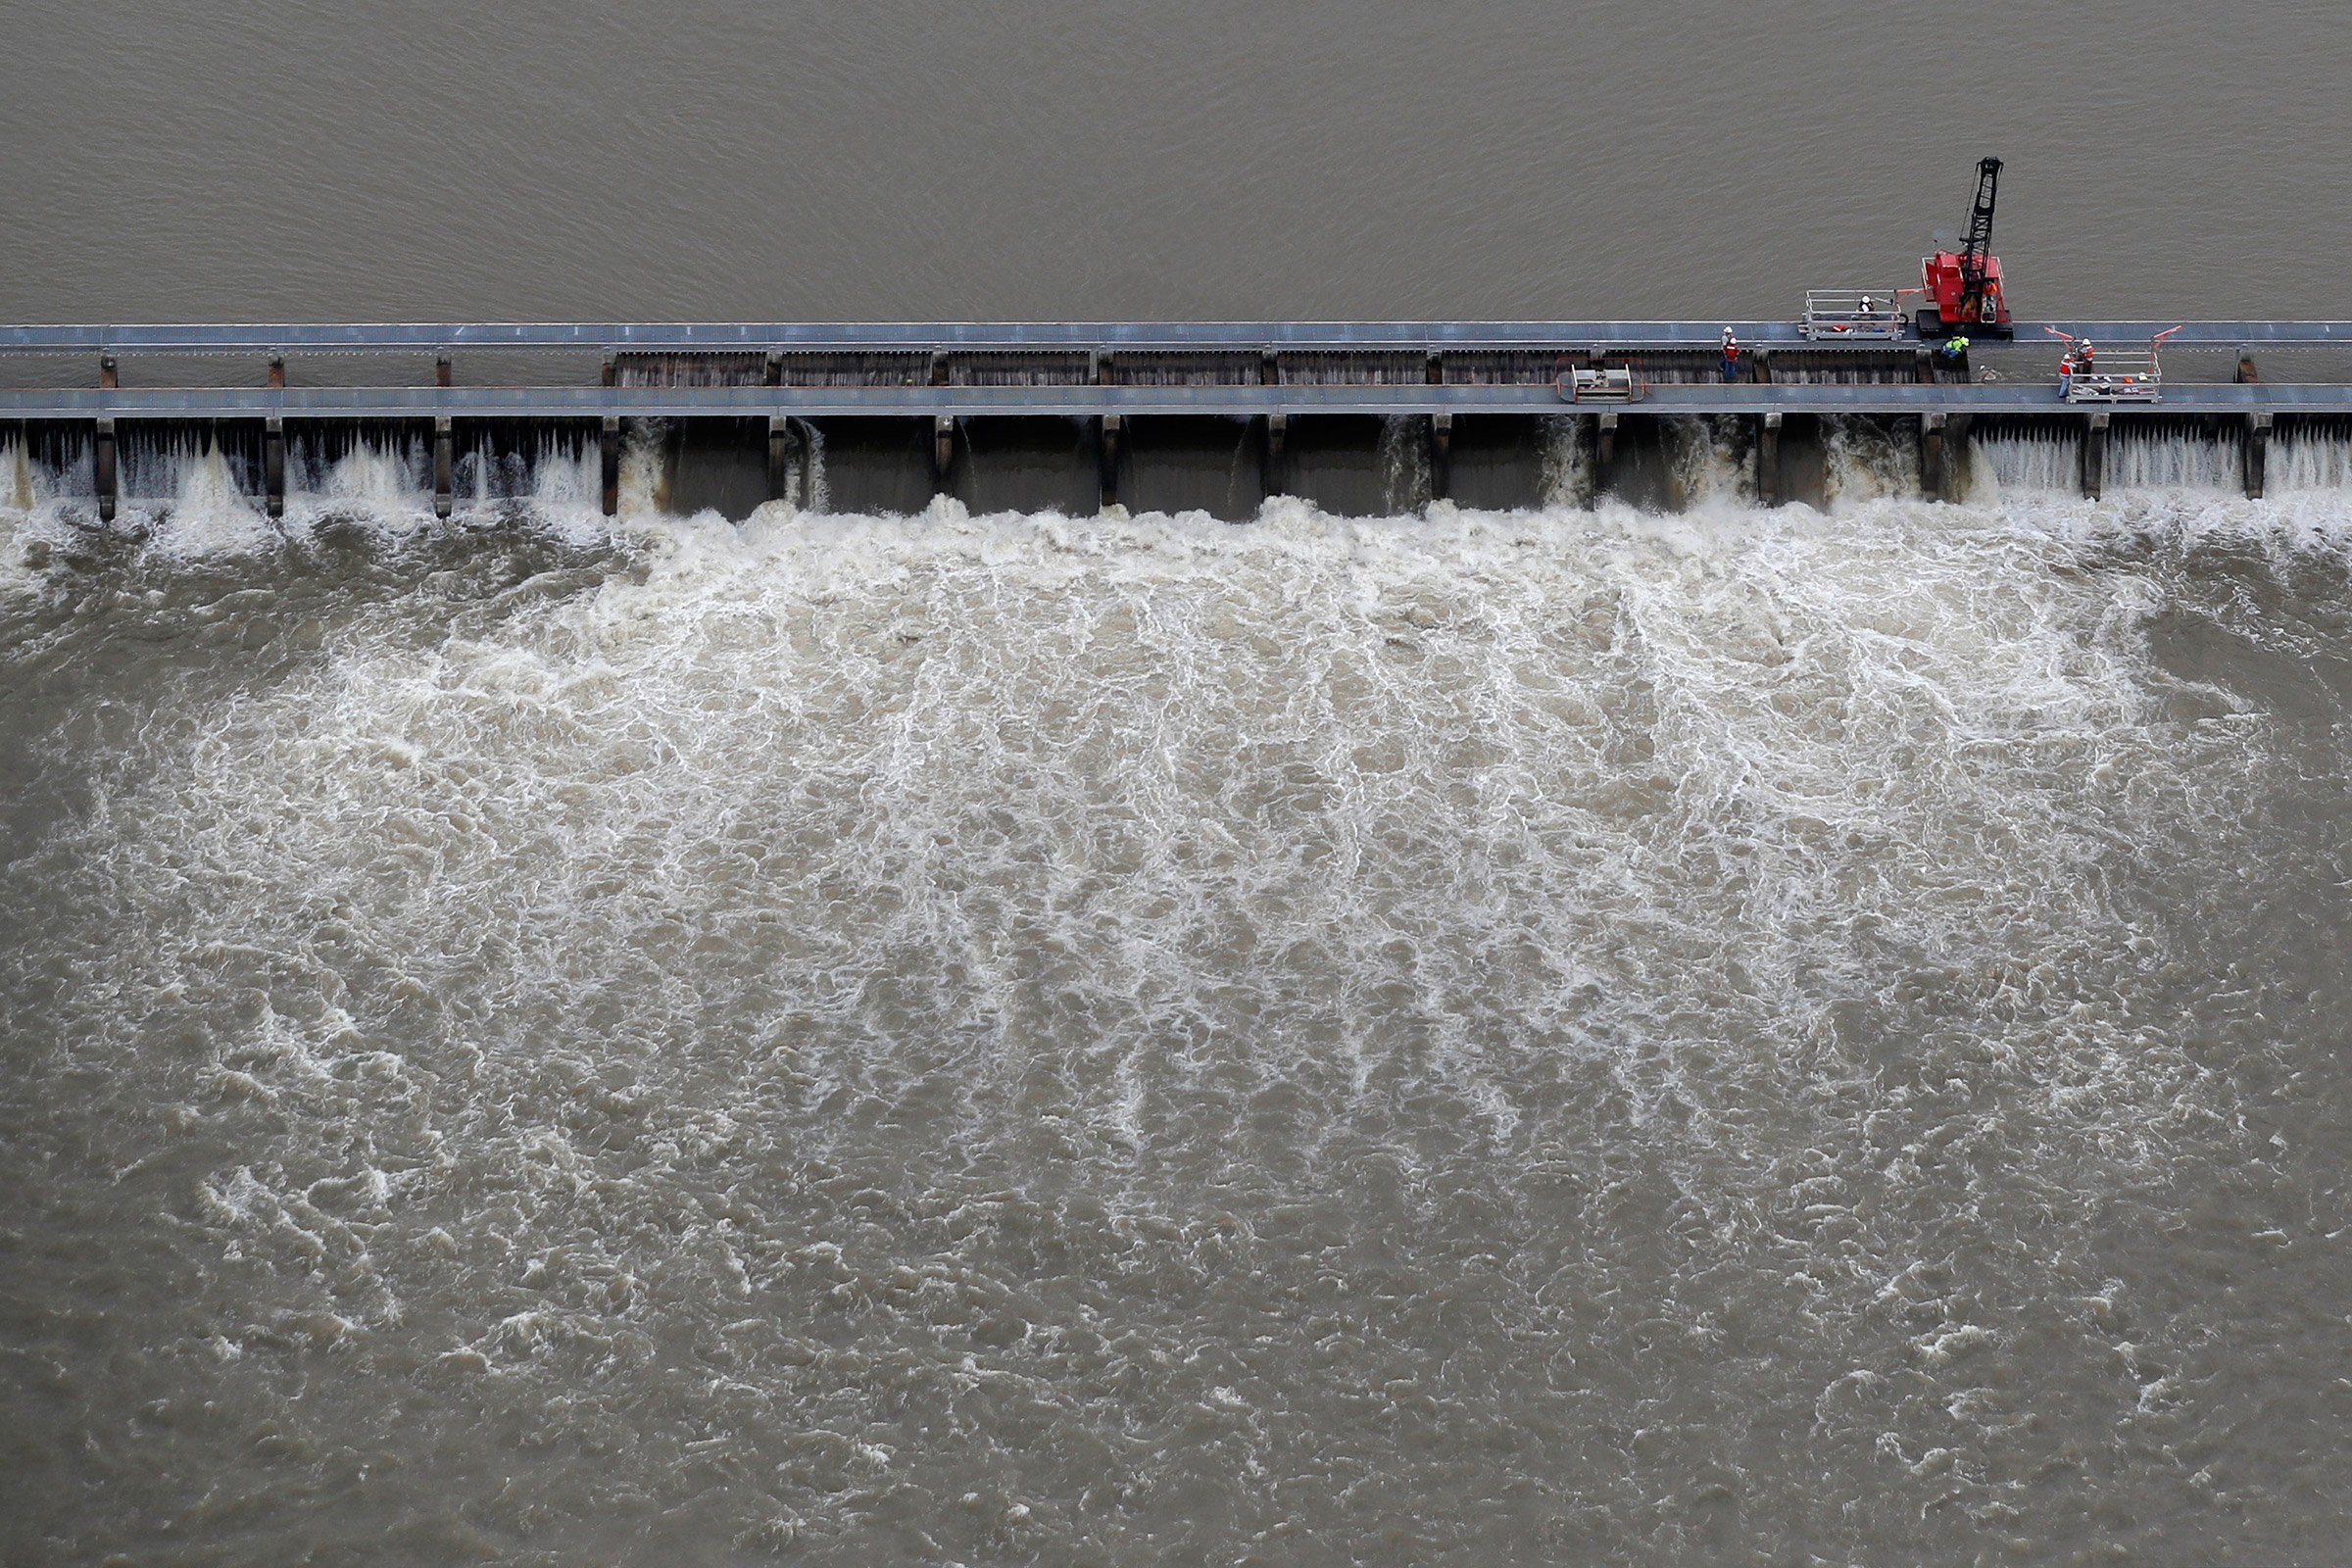 Workers open bays of the Bonnet Carre Spillway, to divert rising water from the Mississippi River to Lake Pontchartrain, upriver from New Orleans, in Norco, La., on May 10, 2019. (Gerald Herbert—AP)